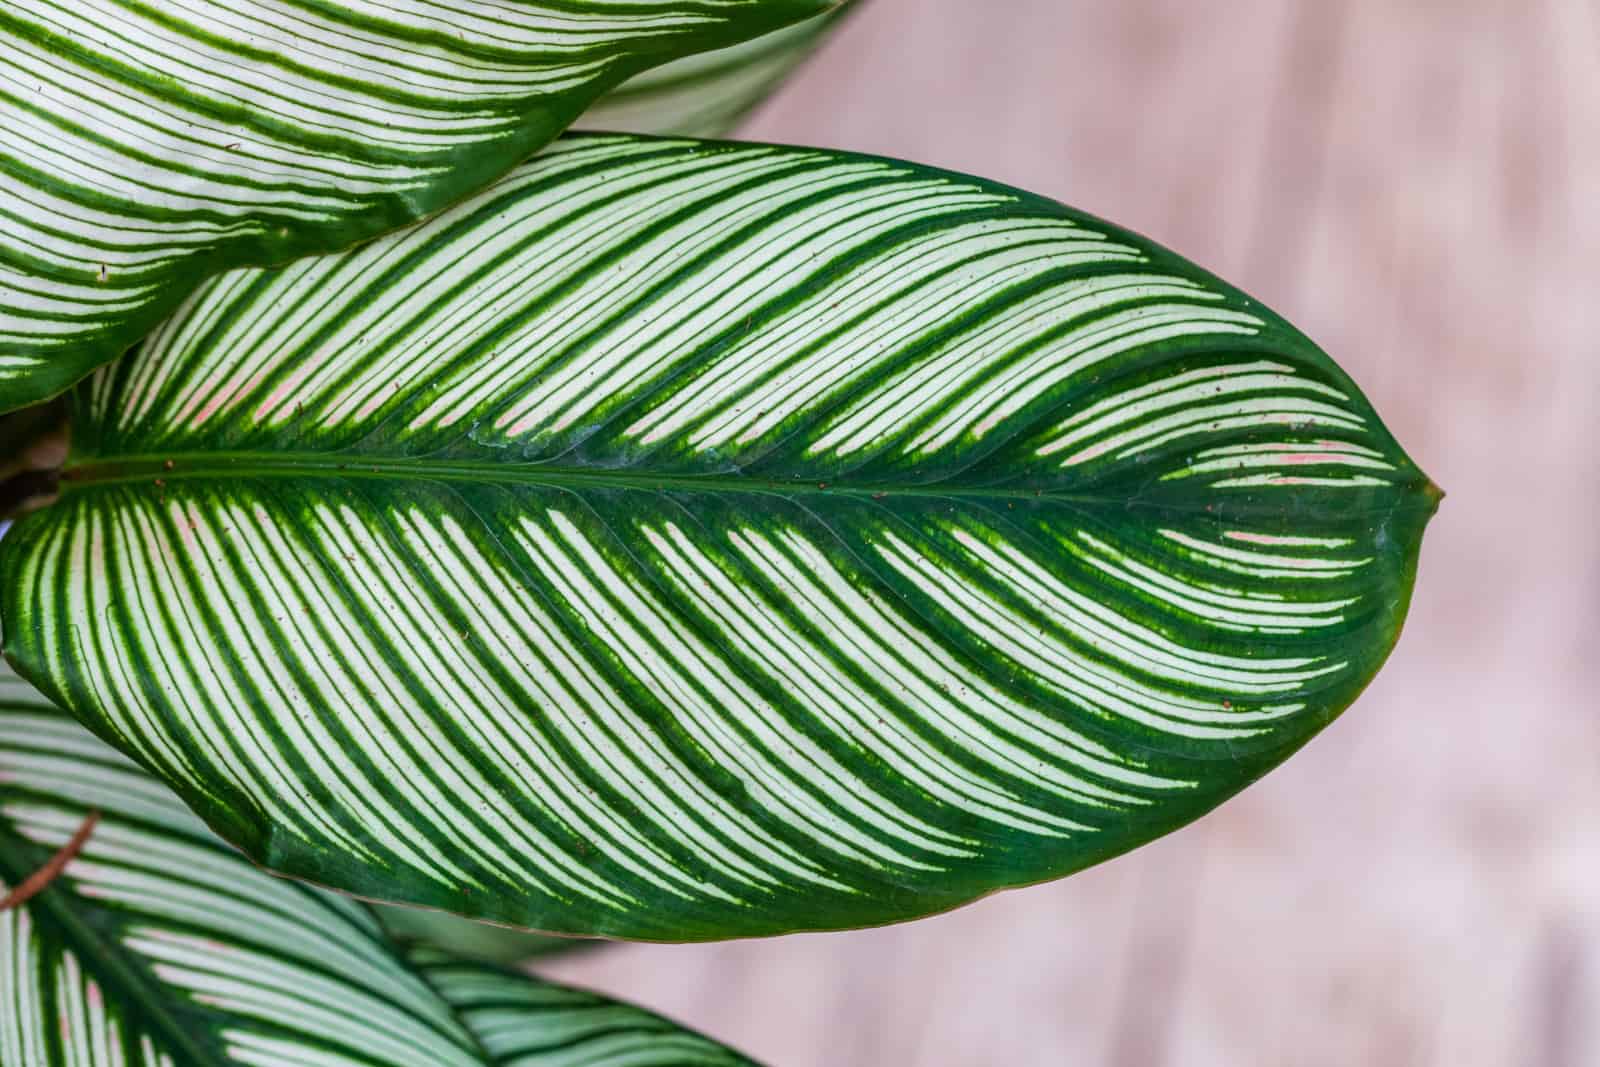 Closeup view on the leaf of Calathea White Star at blurred background